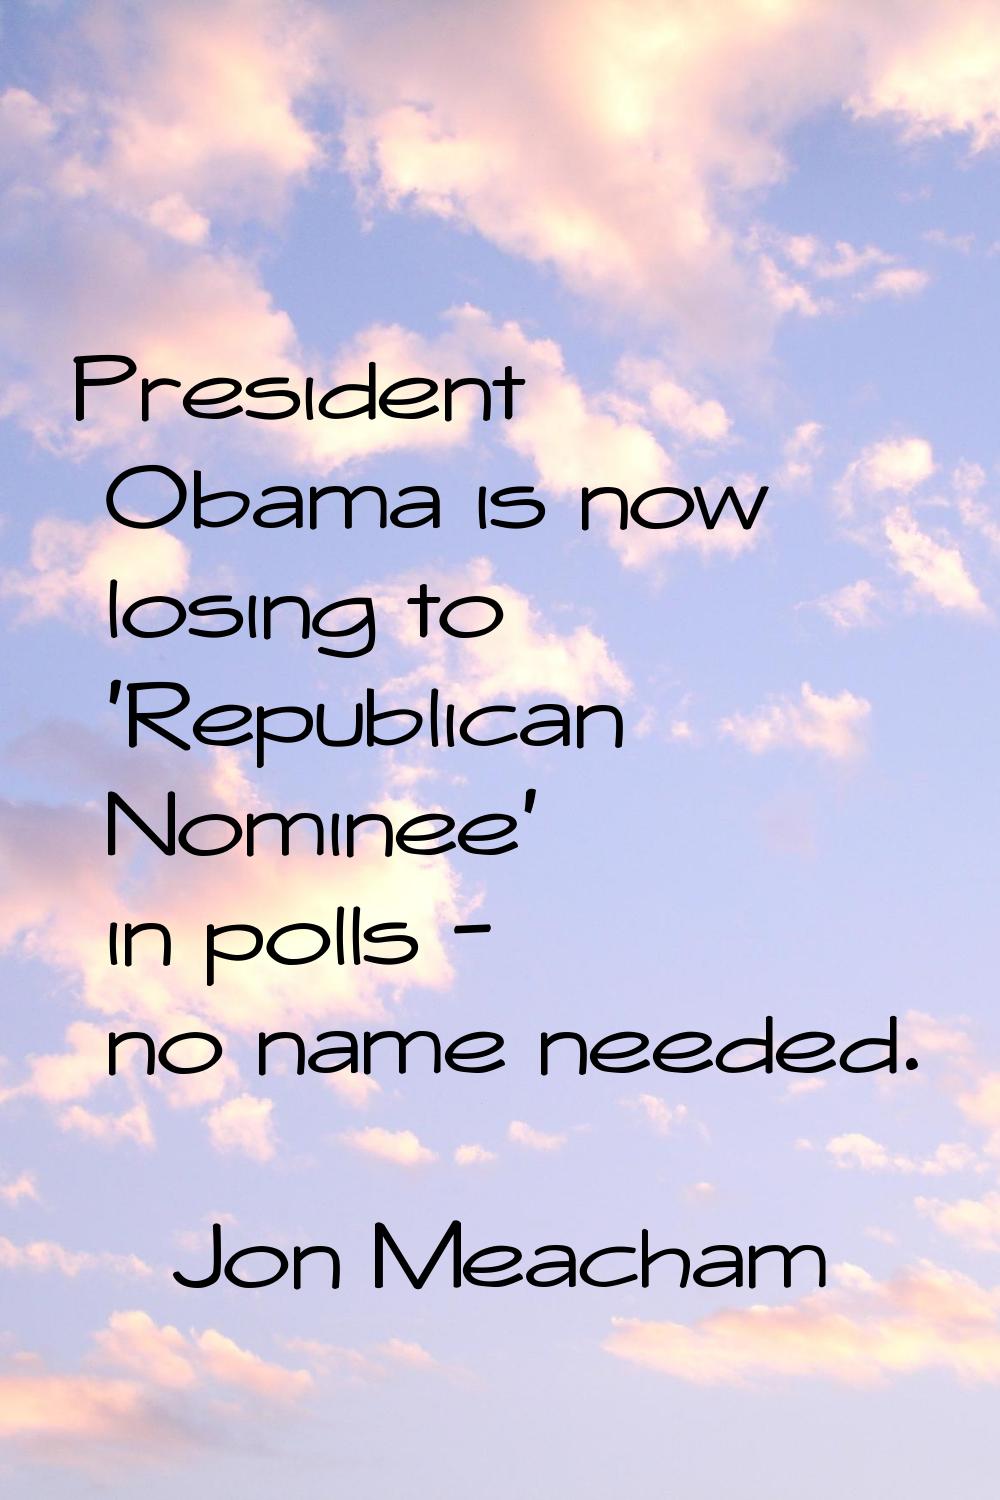 President Obama is now losing to 'Republican Nominee' in polls - no name needed.